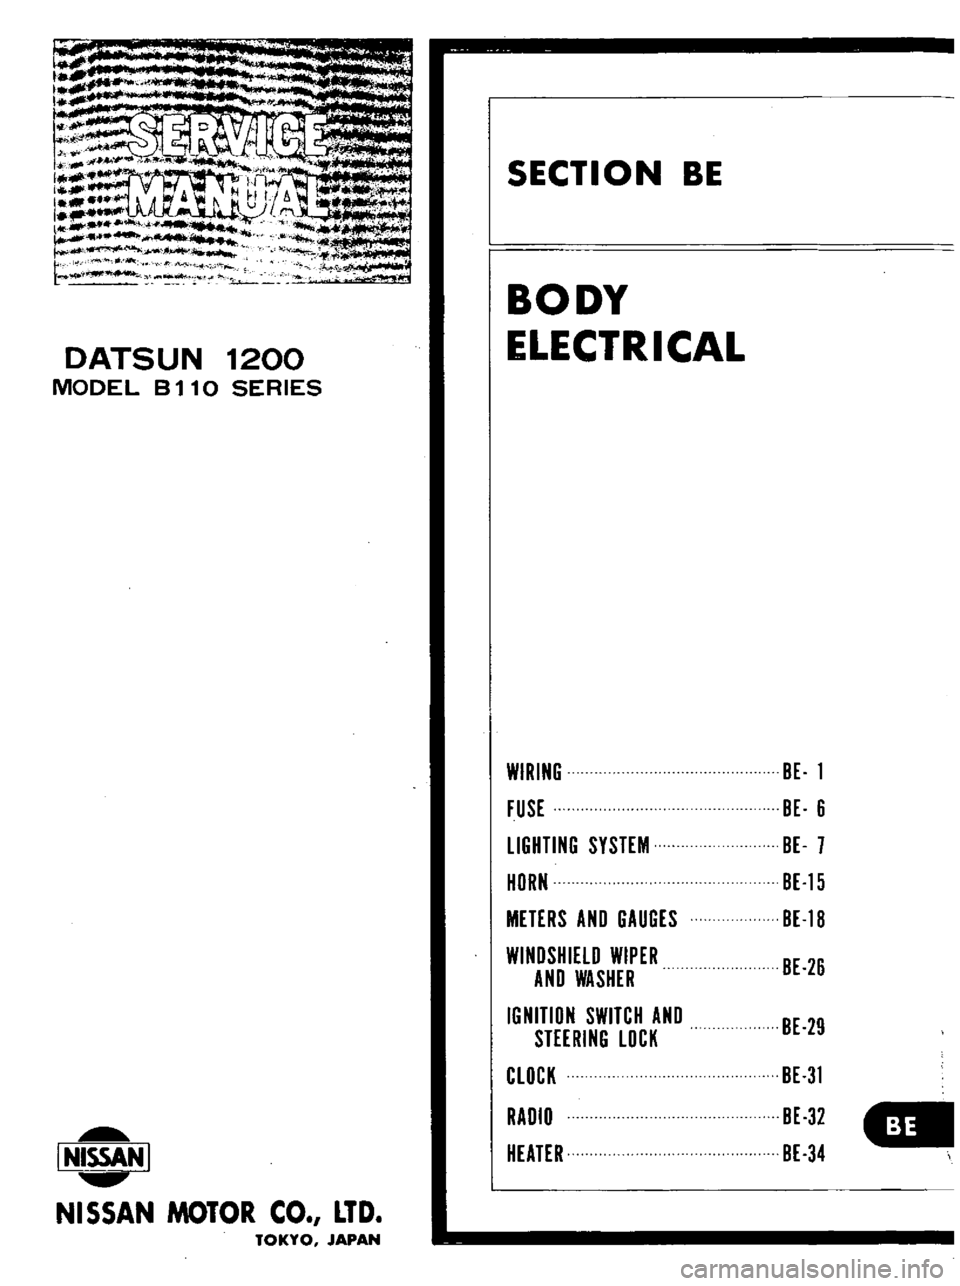 DATSUN B110 1973  Service Repair Manual 
DATSUN 
1200

MODEL 
B 
11 
0

SERIES

I 
NISSAN

I

NISSAN 
MOTOR 
CO 
LTD

TOKYO 
JAPAN 
SECTION 
BE

BODY

ELECTRICAL

WIRING

FUSE

LIGHTING 
SYSTEM

HORN

METERS 
AND

GAUGES

WINDSHIELD 
WIPER
